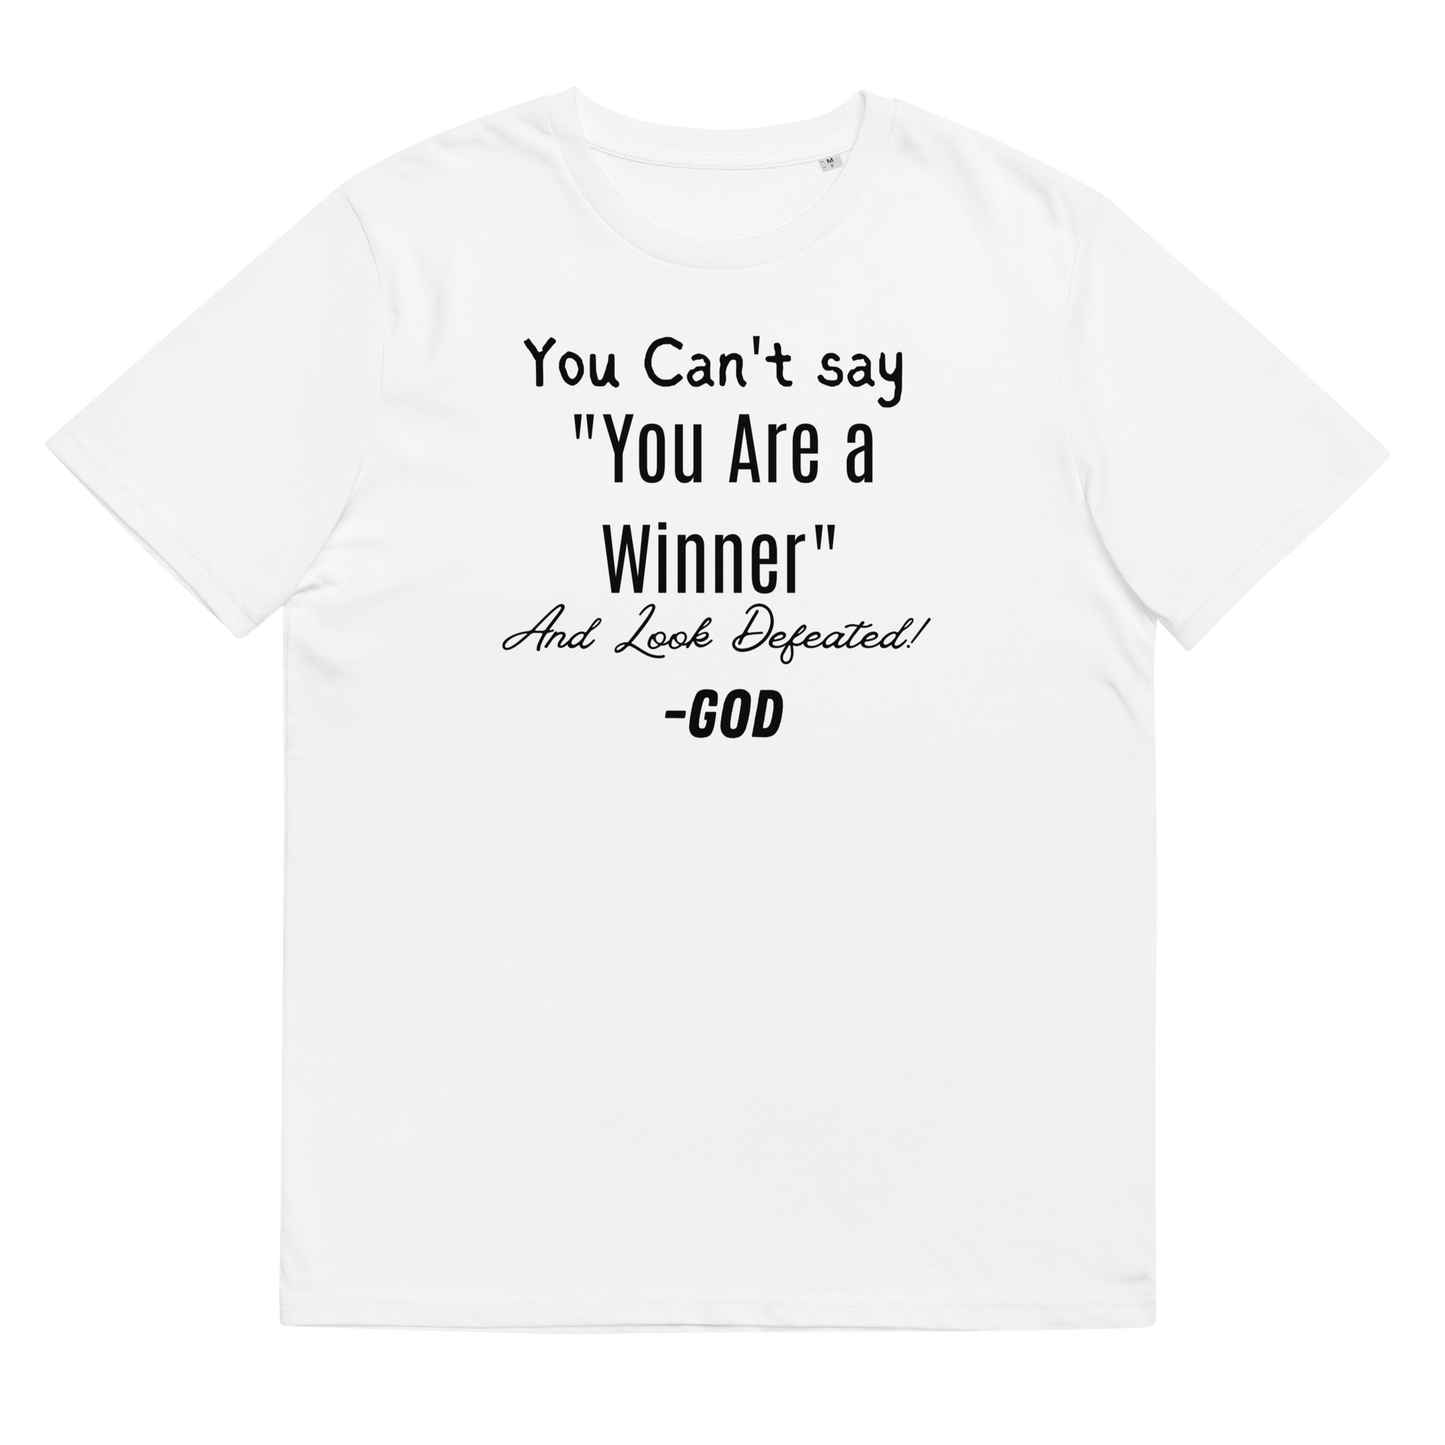 You are a Winner T-shirt